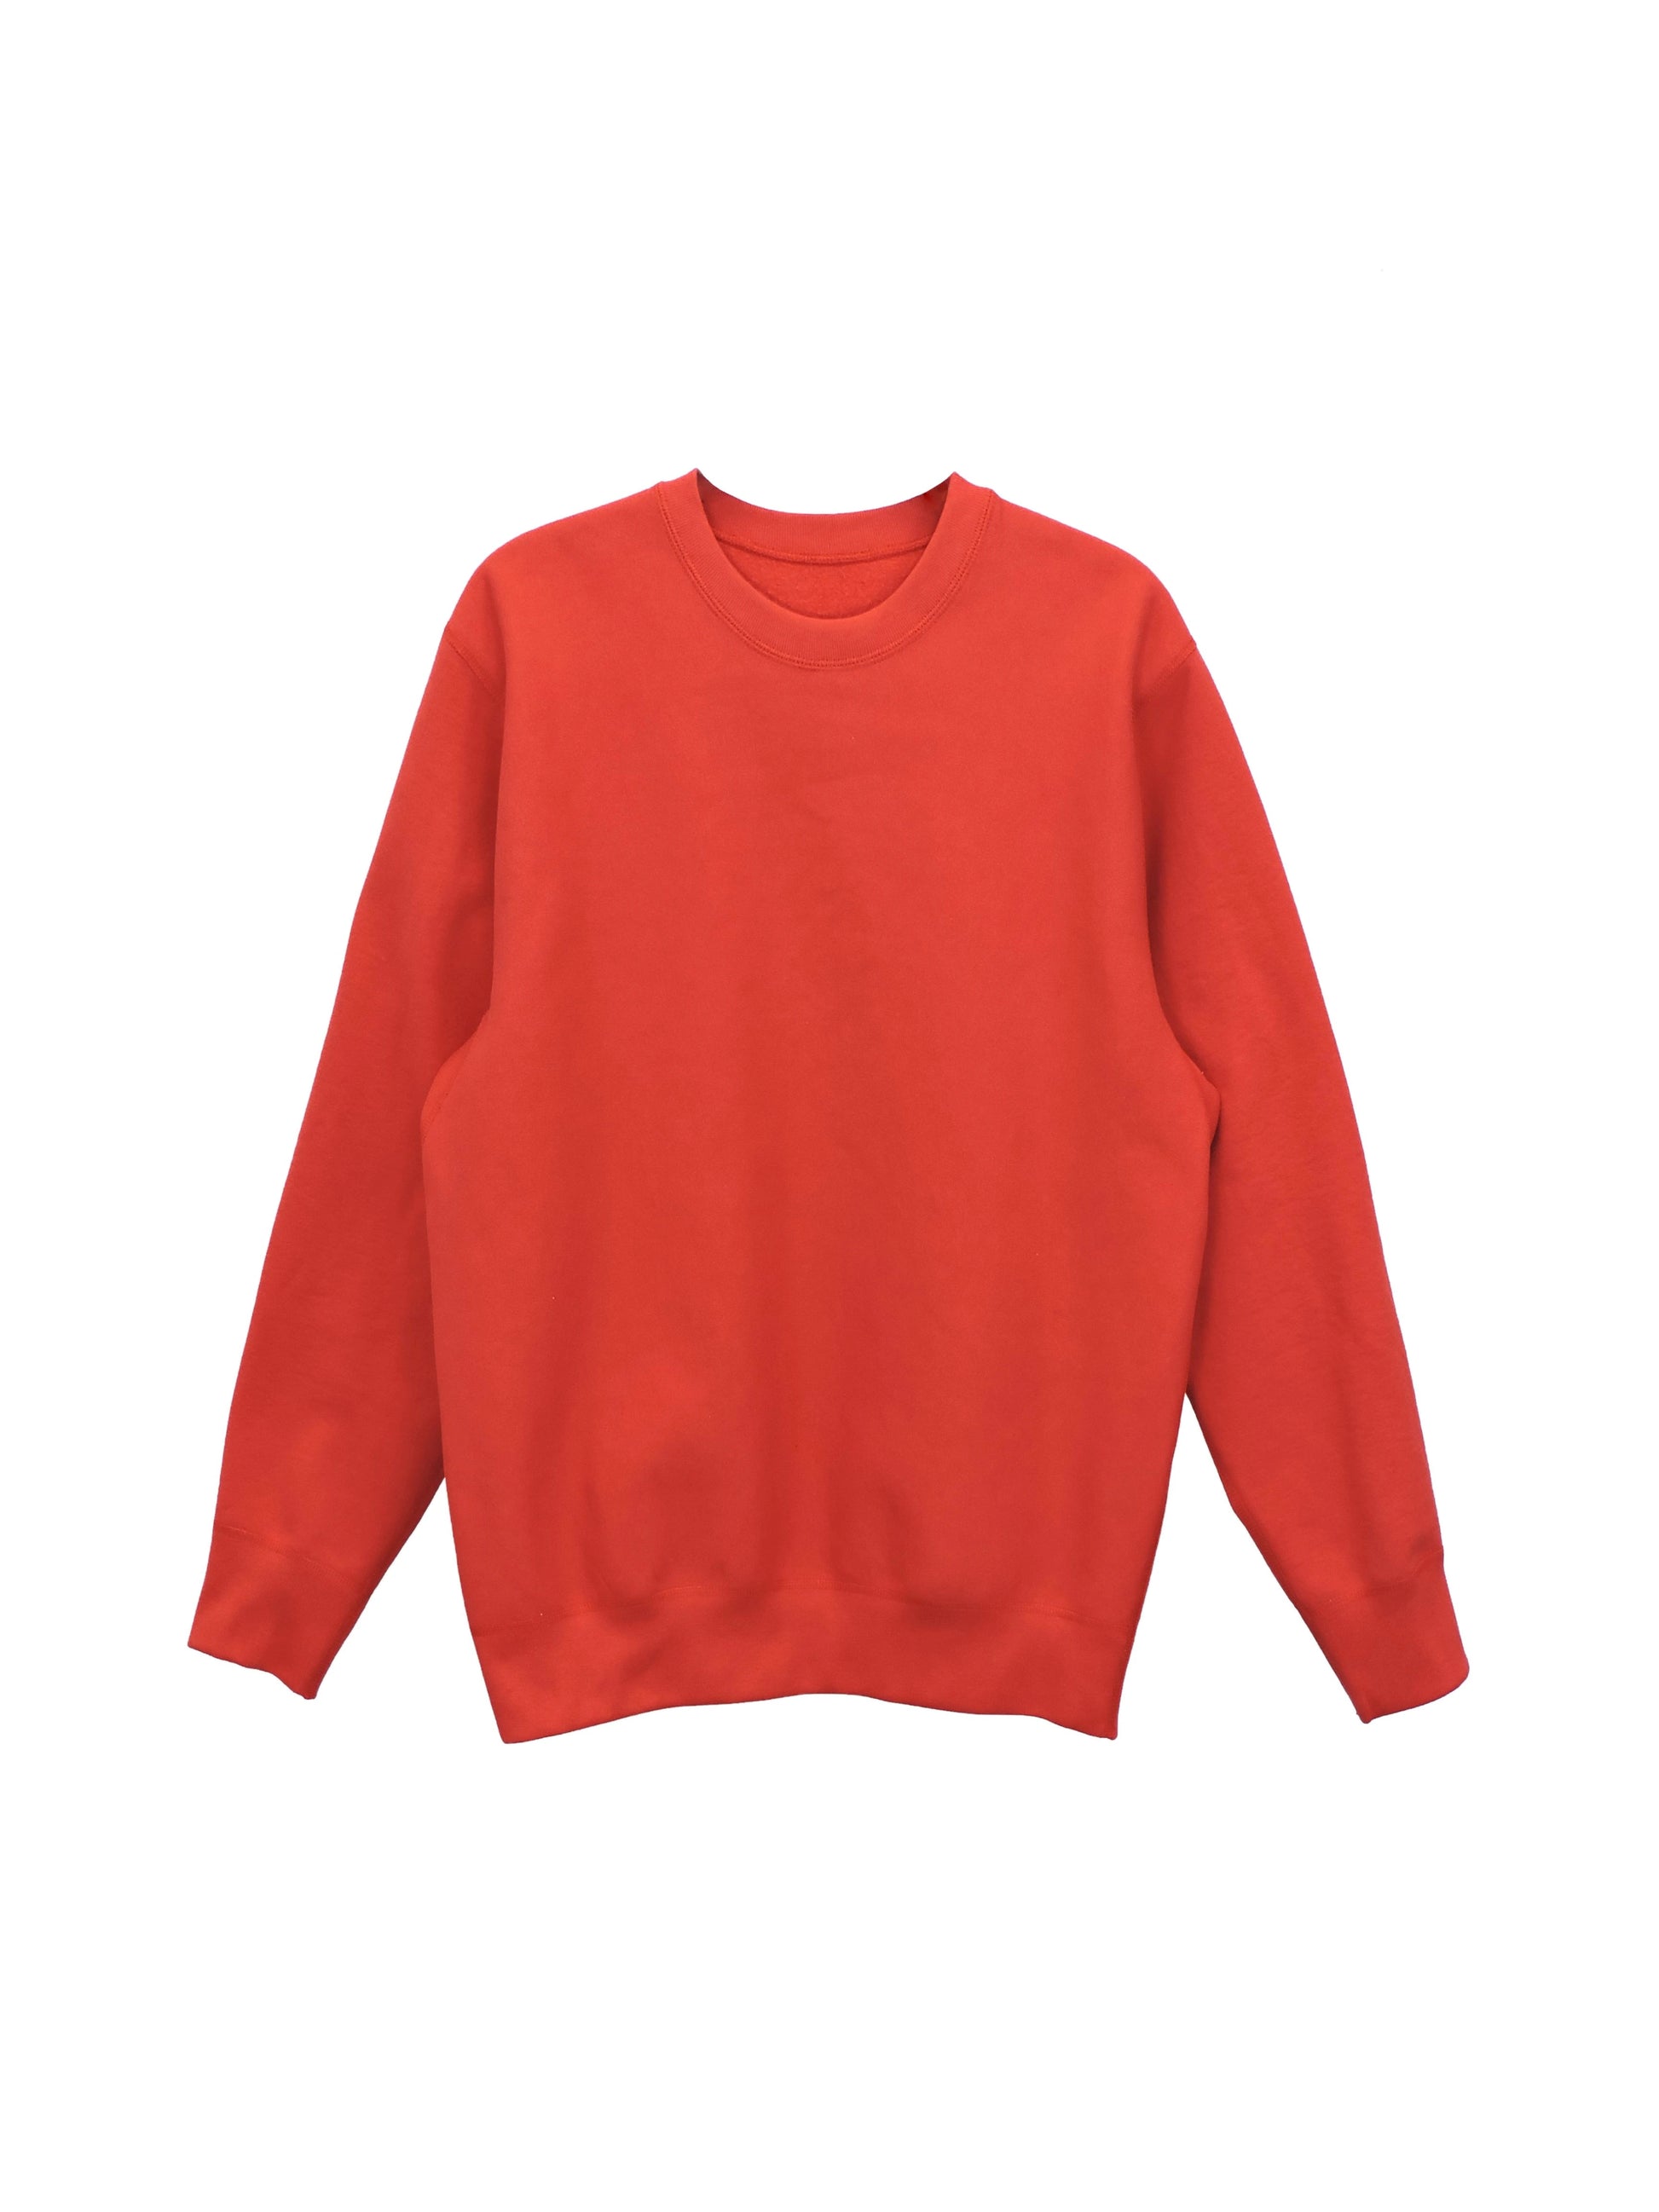 Red Fleece Crewneck with Dense Cotton and Loose Fit.